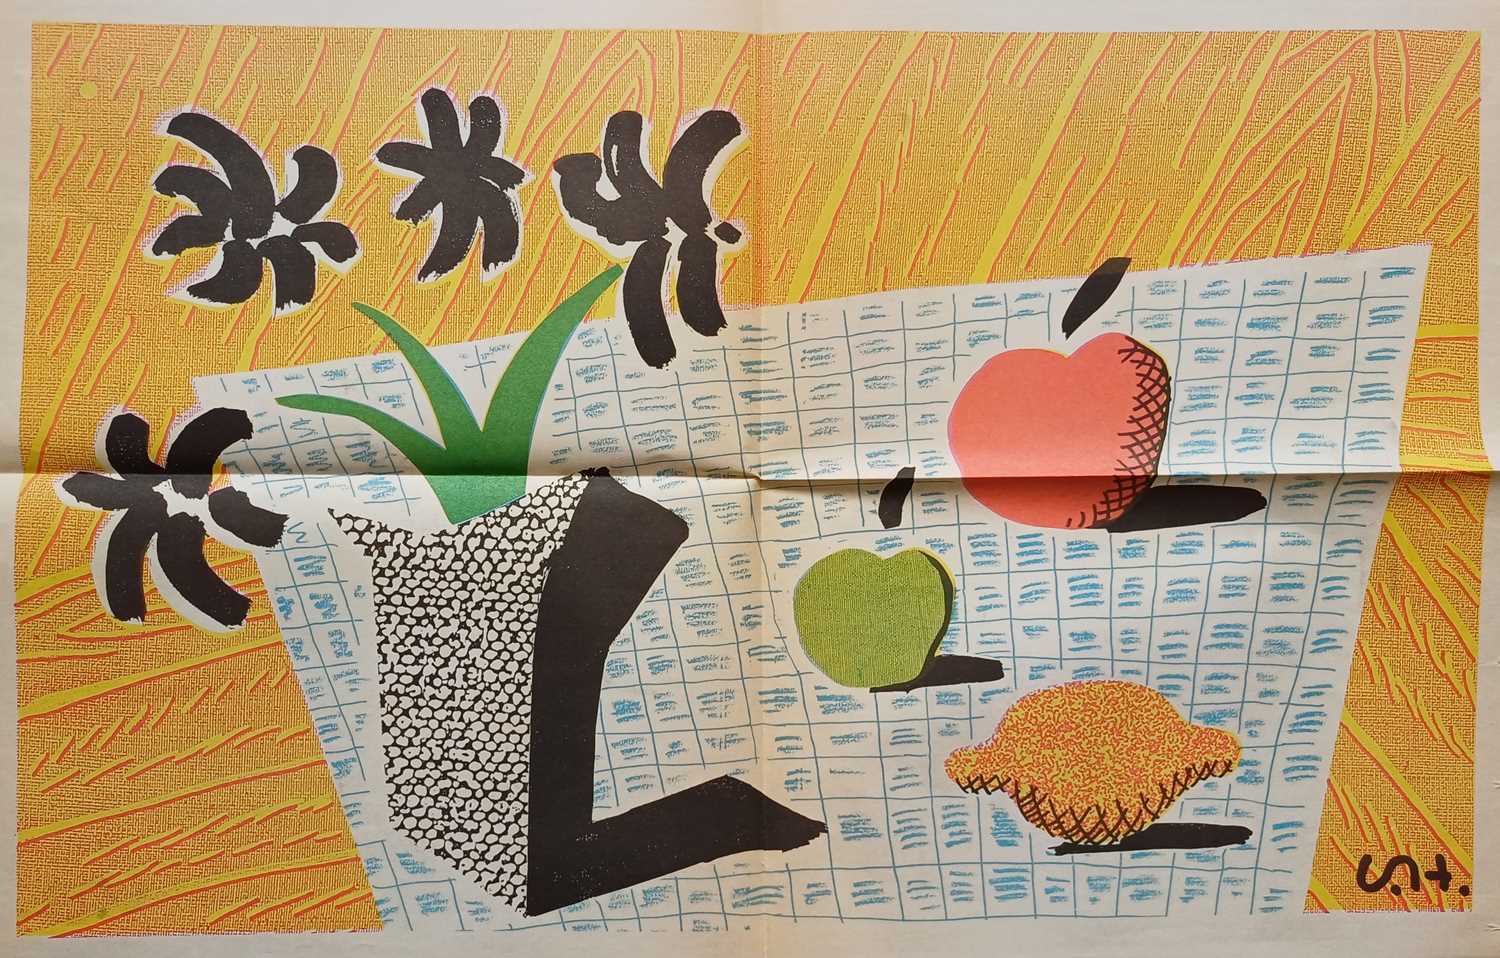 Hockney (David) ‘Two Apples & One Lemon & Four Flowers’, lithographic colour print described on